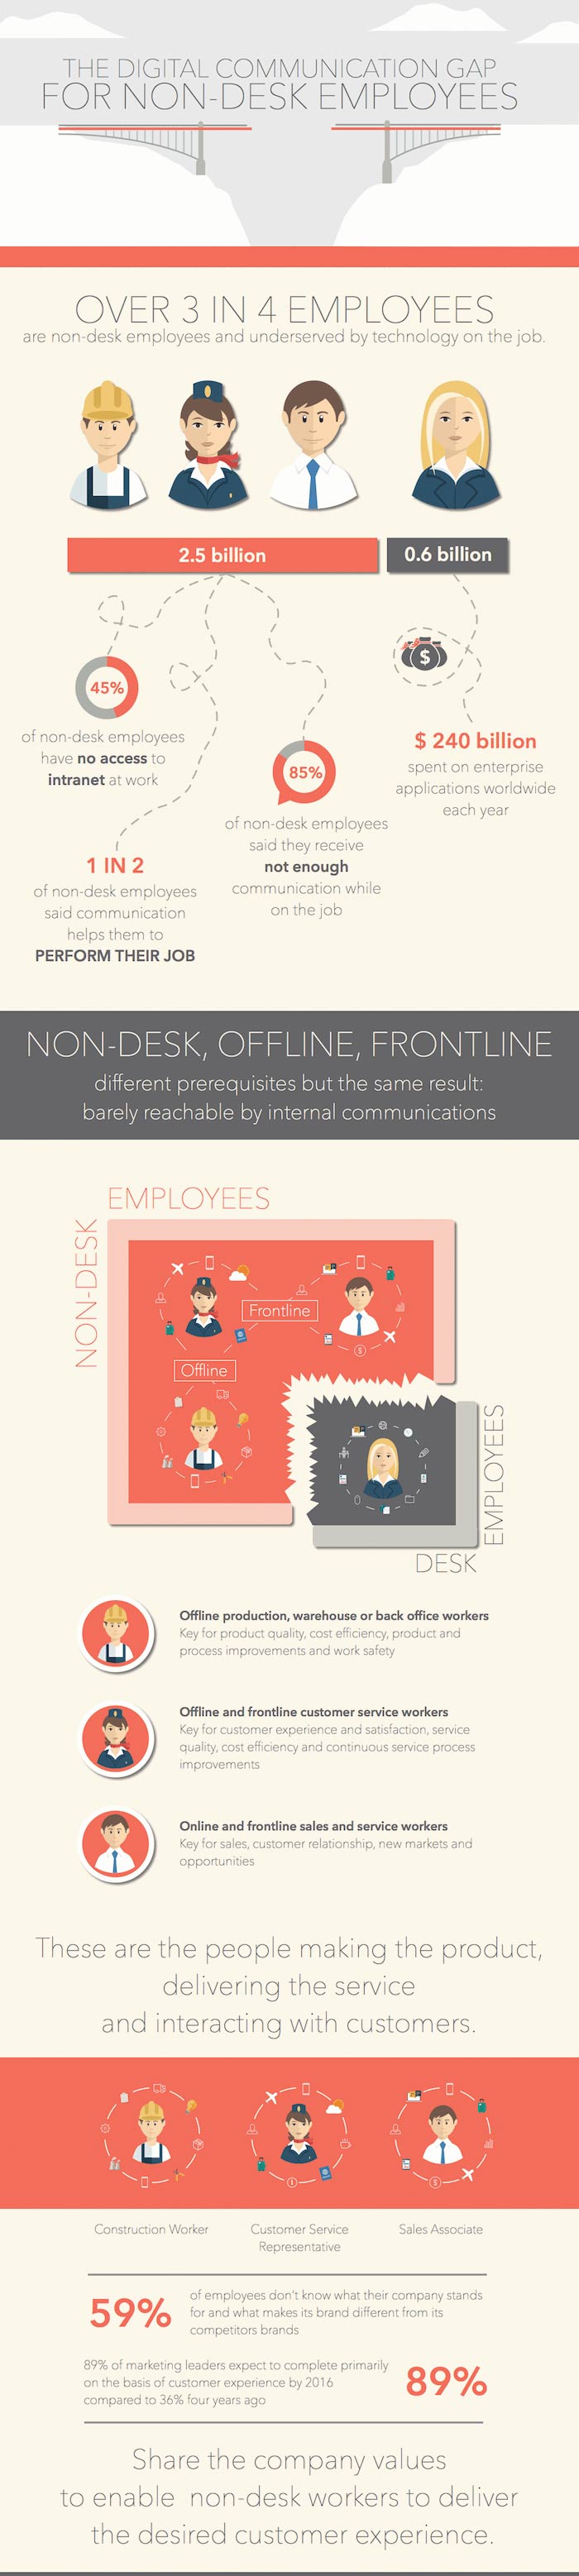 Internal Communications for Non-Desk, Frontline and Offline Employees